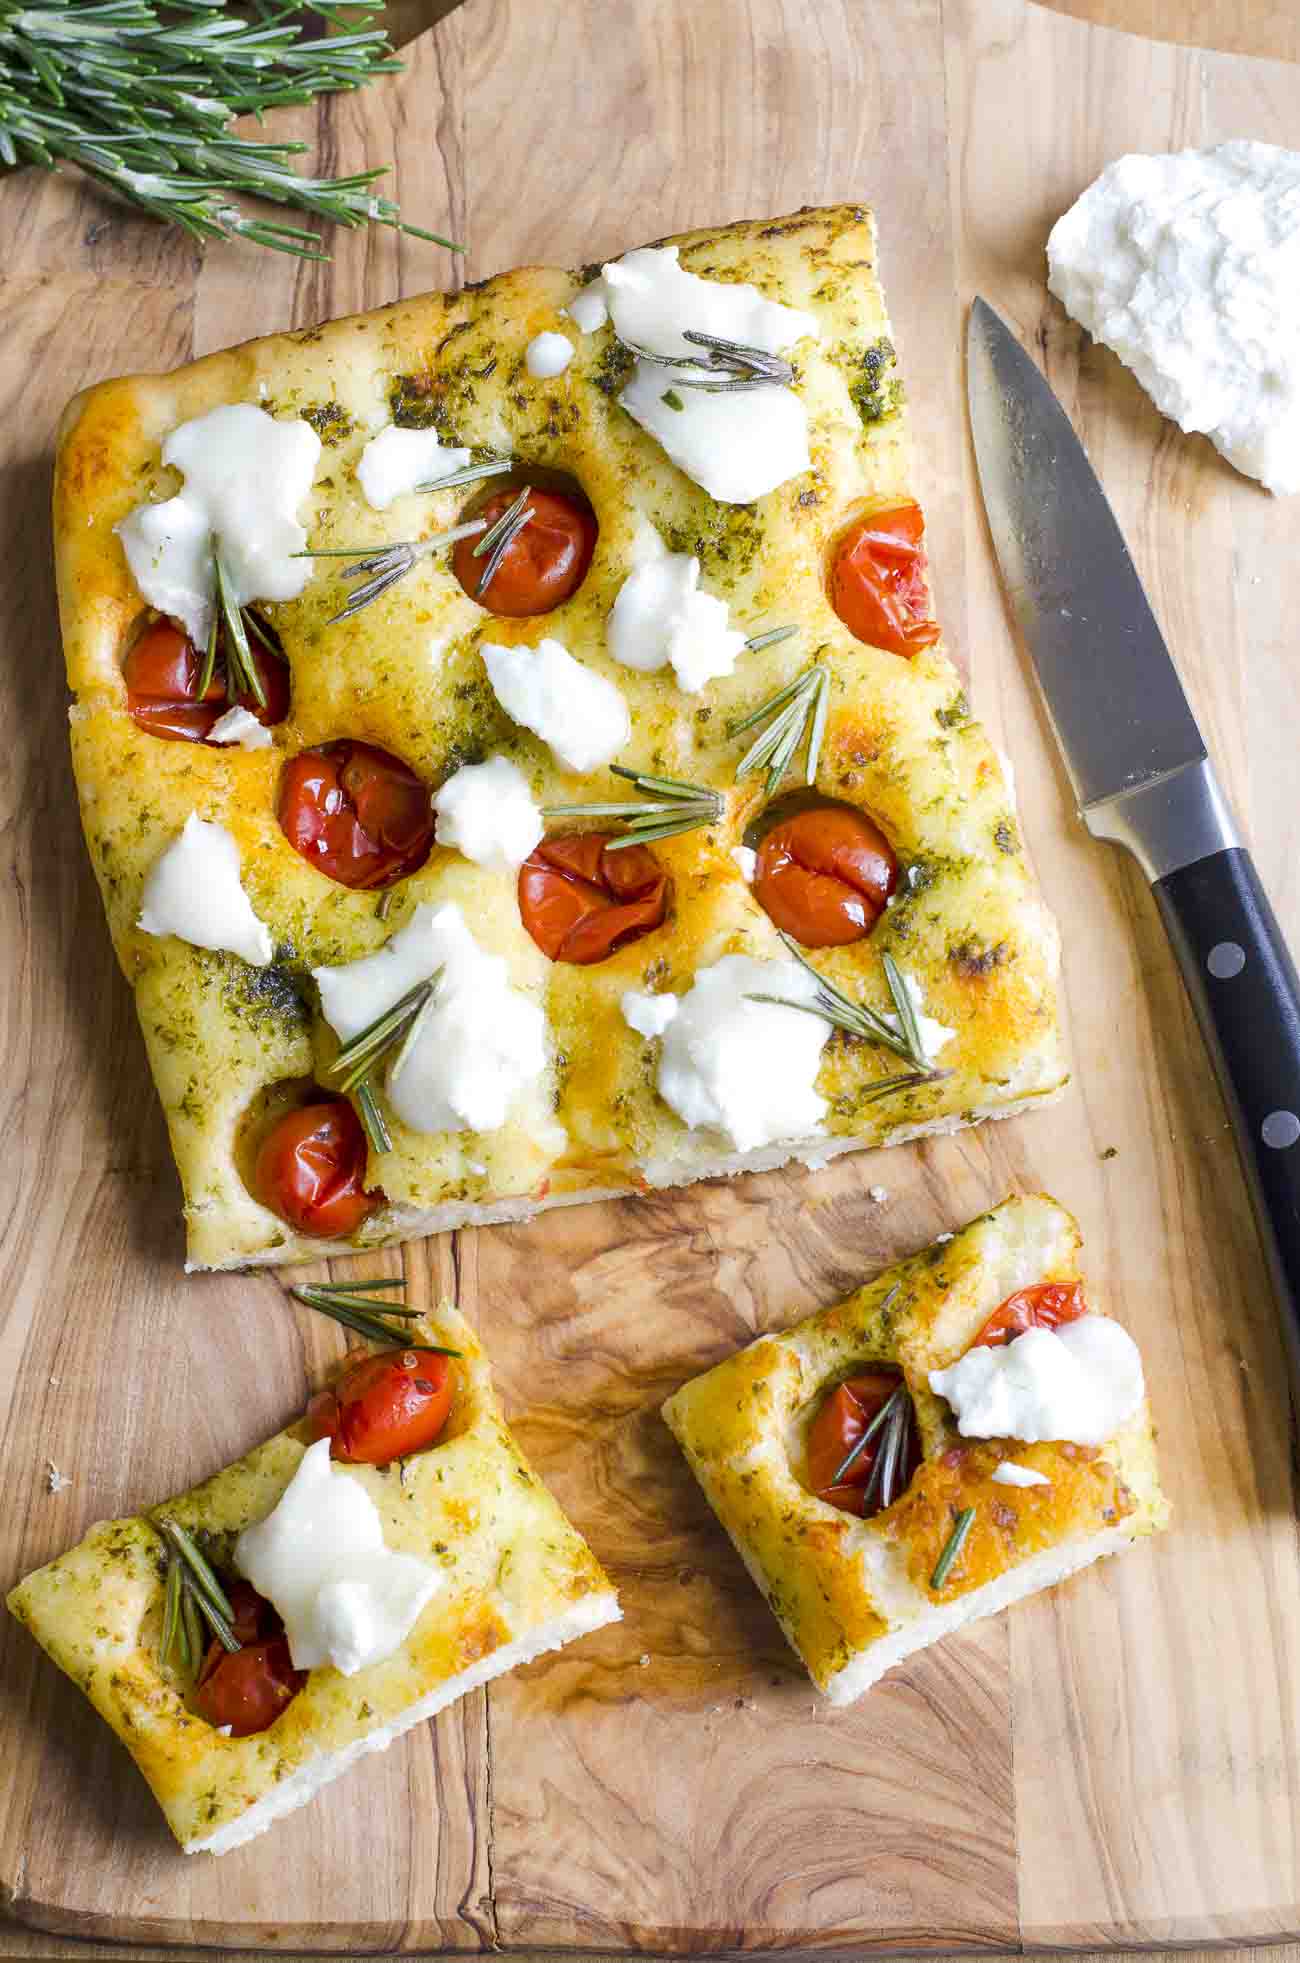 Focaccia Bread Recipe With Cherry Tomatoes, Basil Pesto And Goat Cheese ...